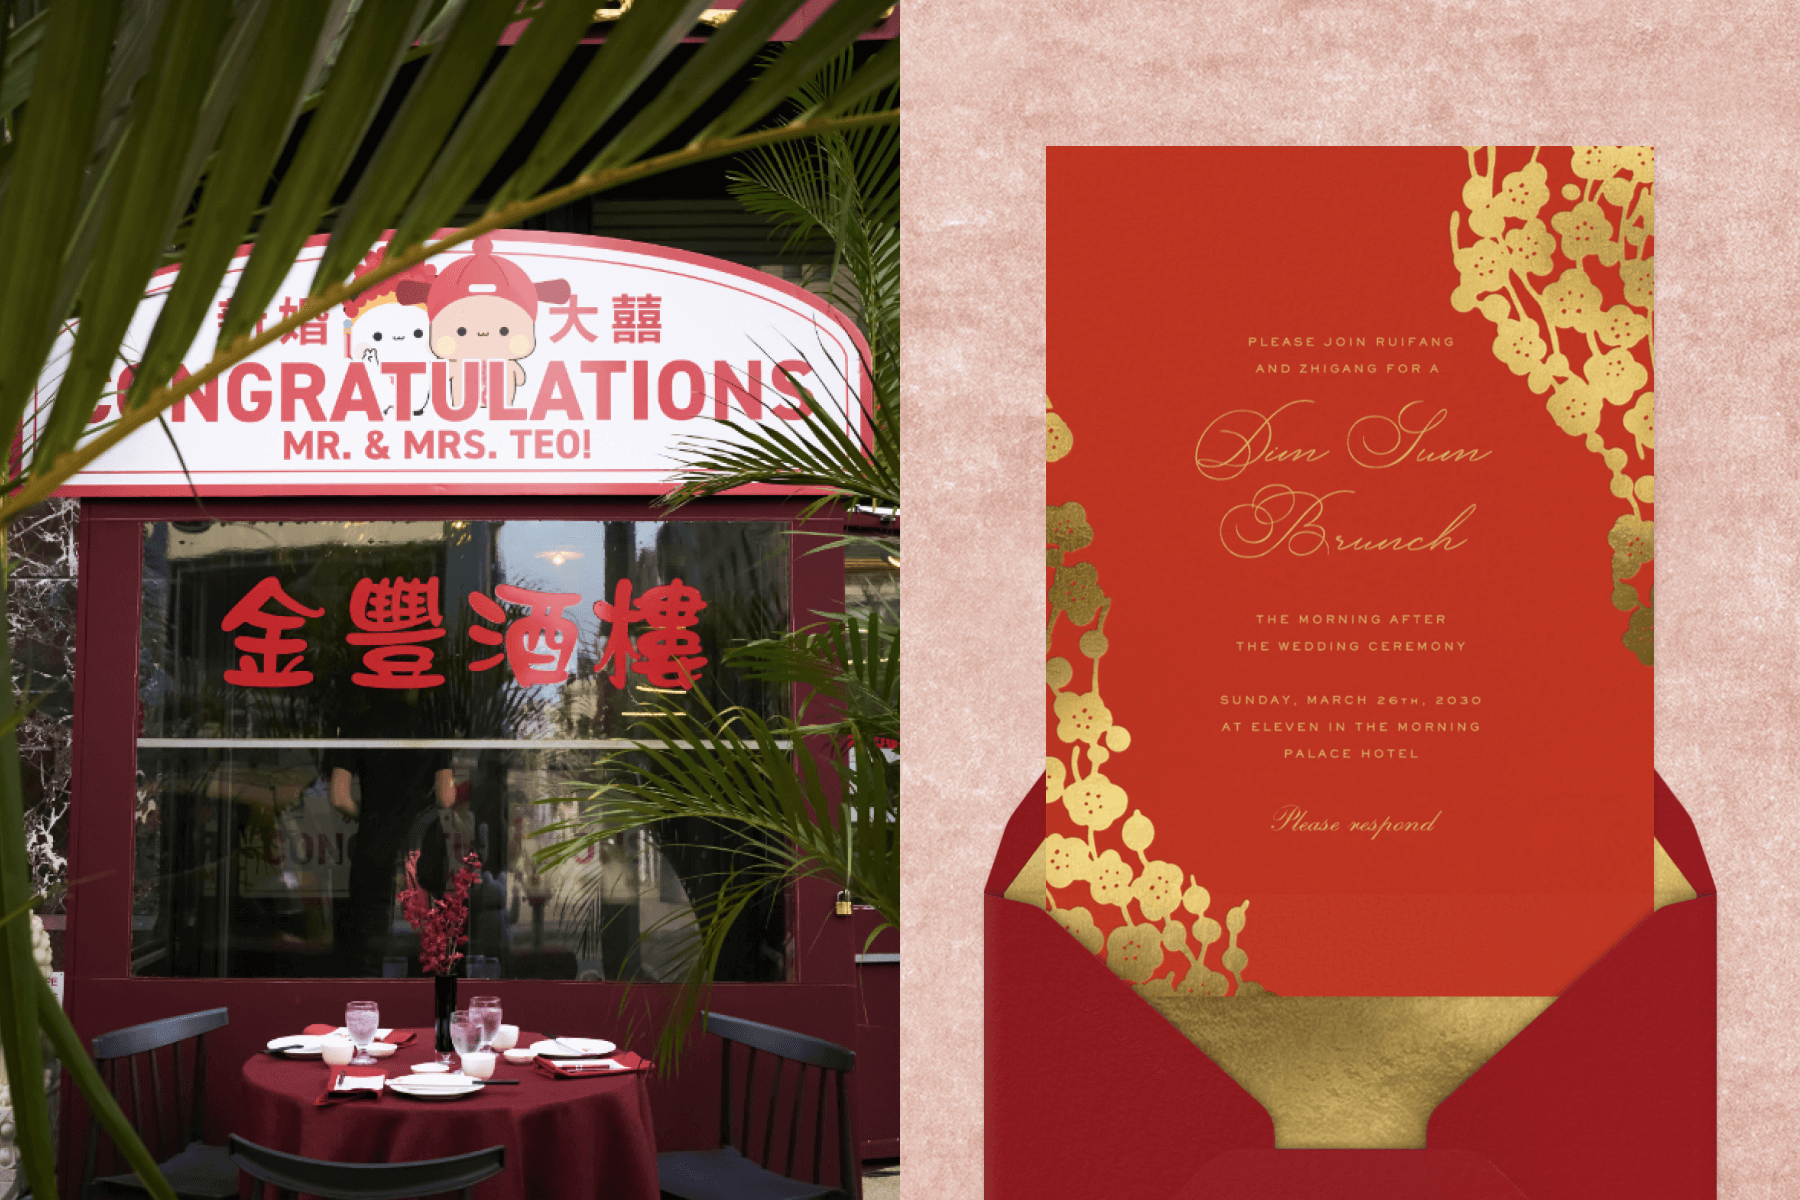 Left: A set table at a Chinese restaurant under a sign that reads “Congratulations Mr. & Mis. Teo!” Right: A red wedding invitation with gold cherry blossom illustrations.